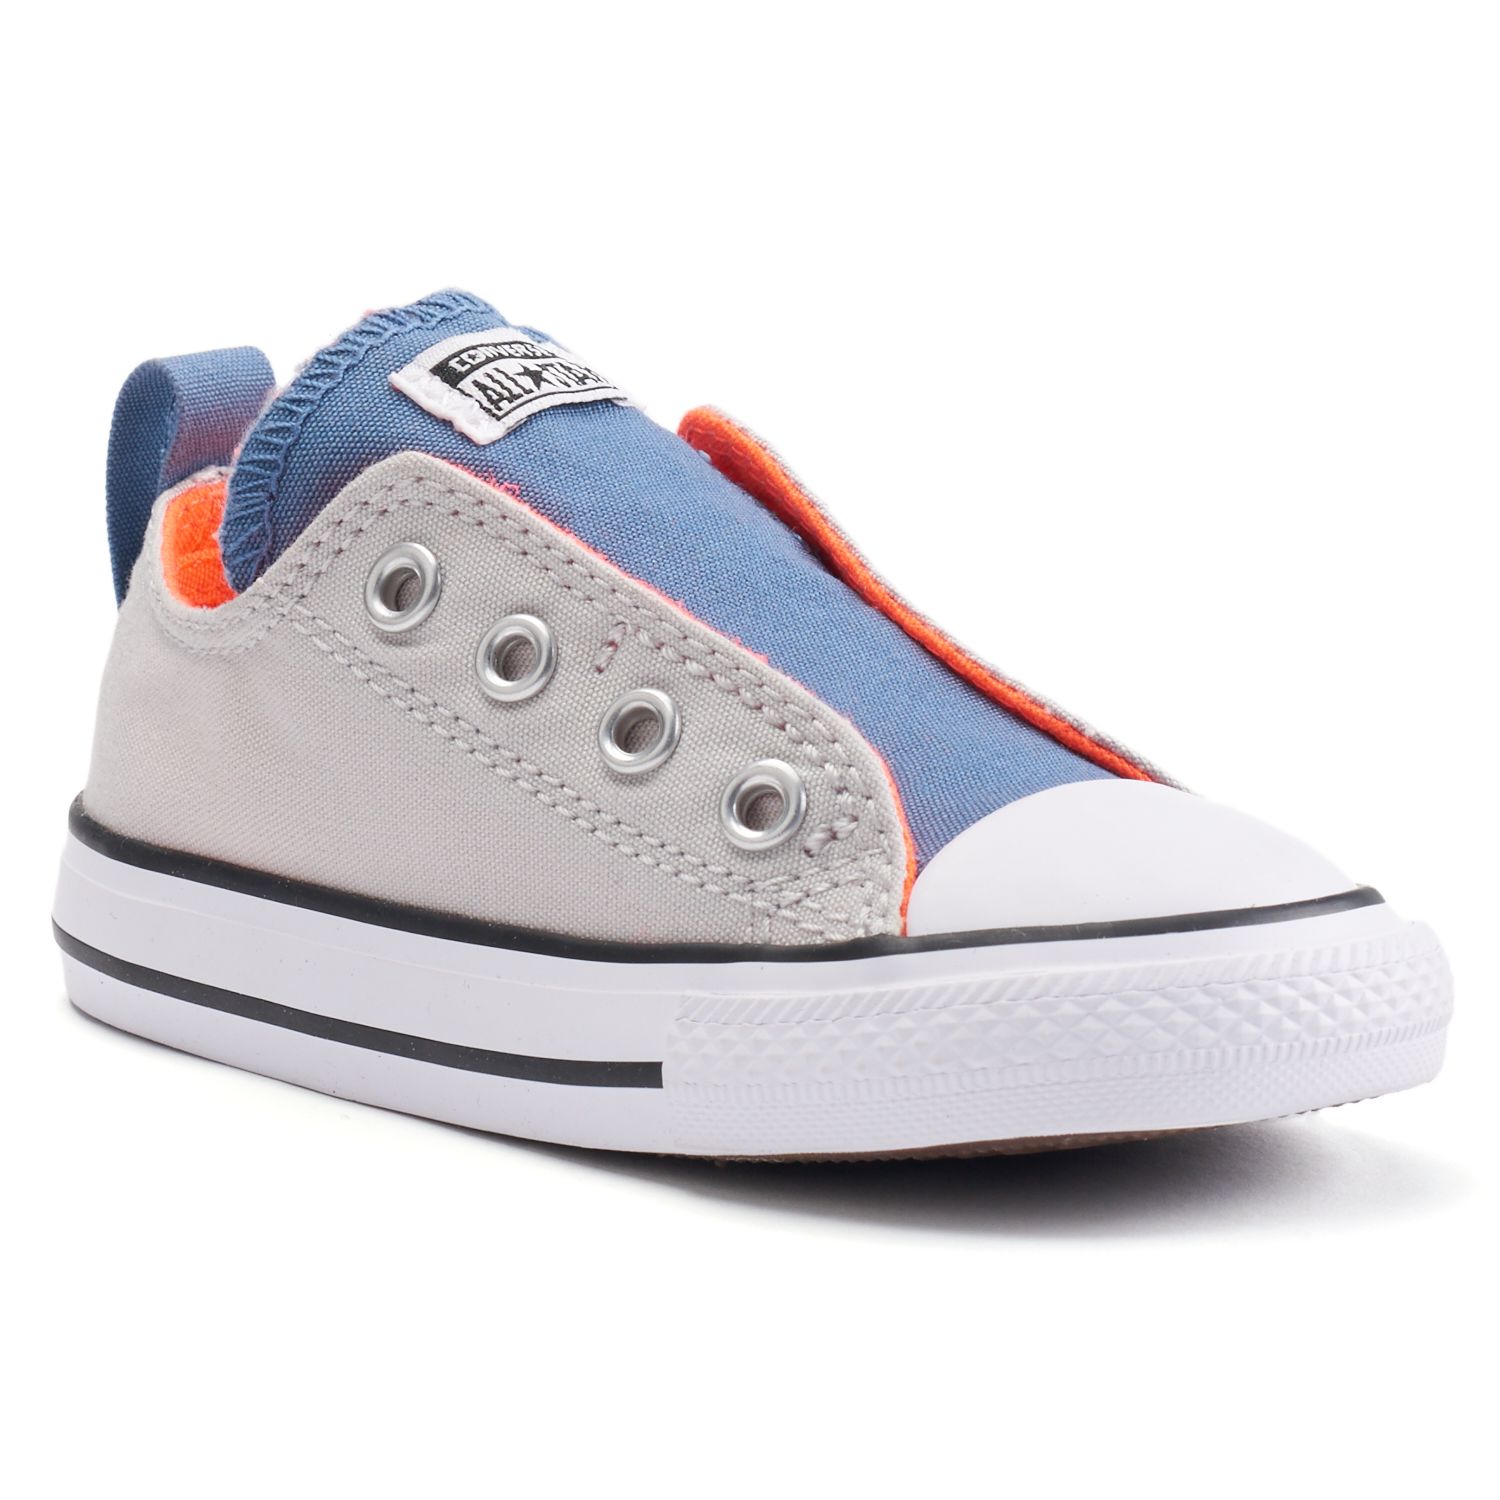 Toddler Converse Chuck Taylor All Star Simple Slip Shoes